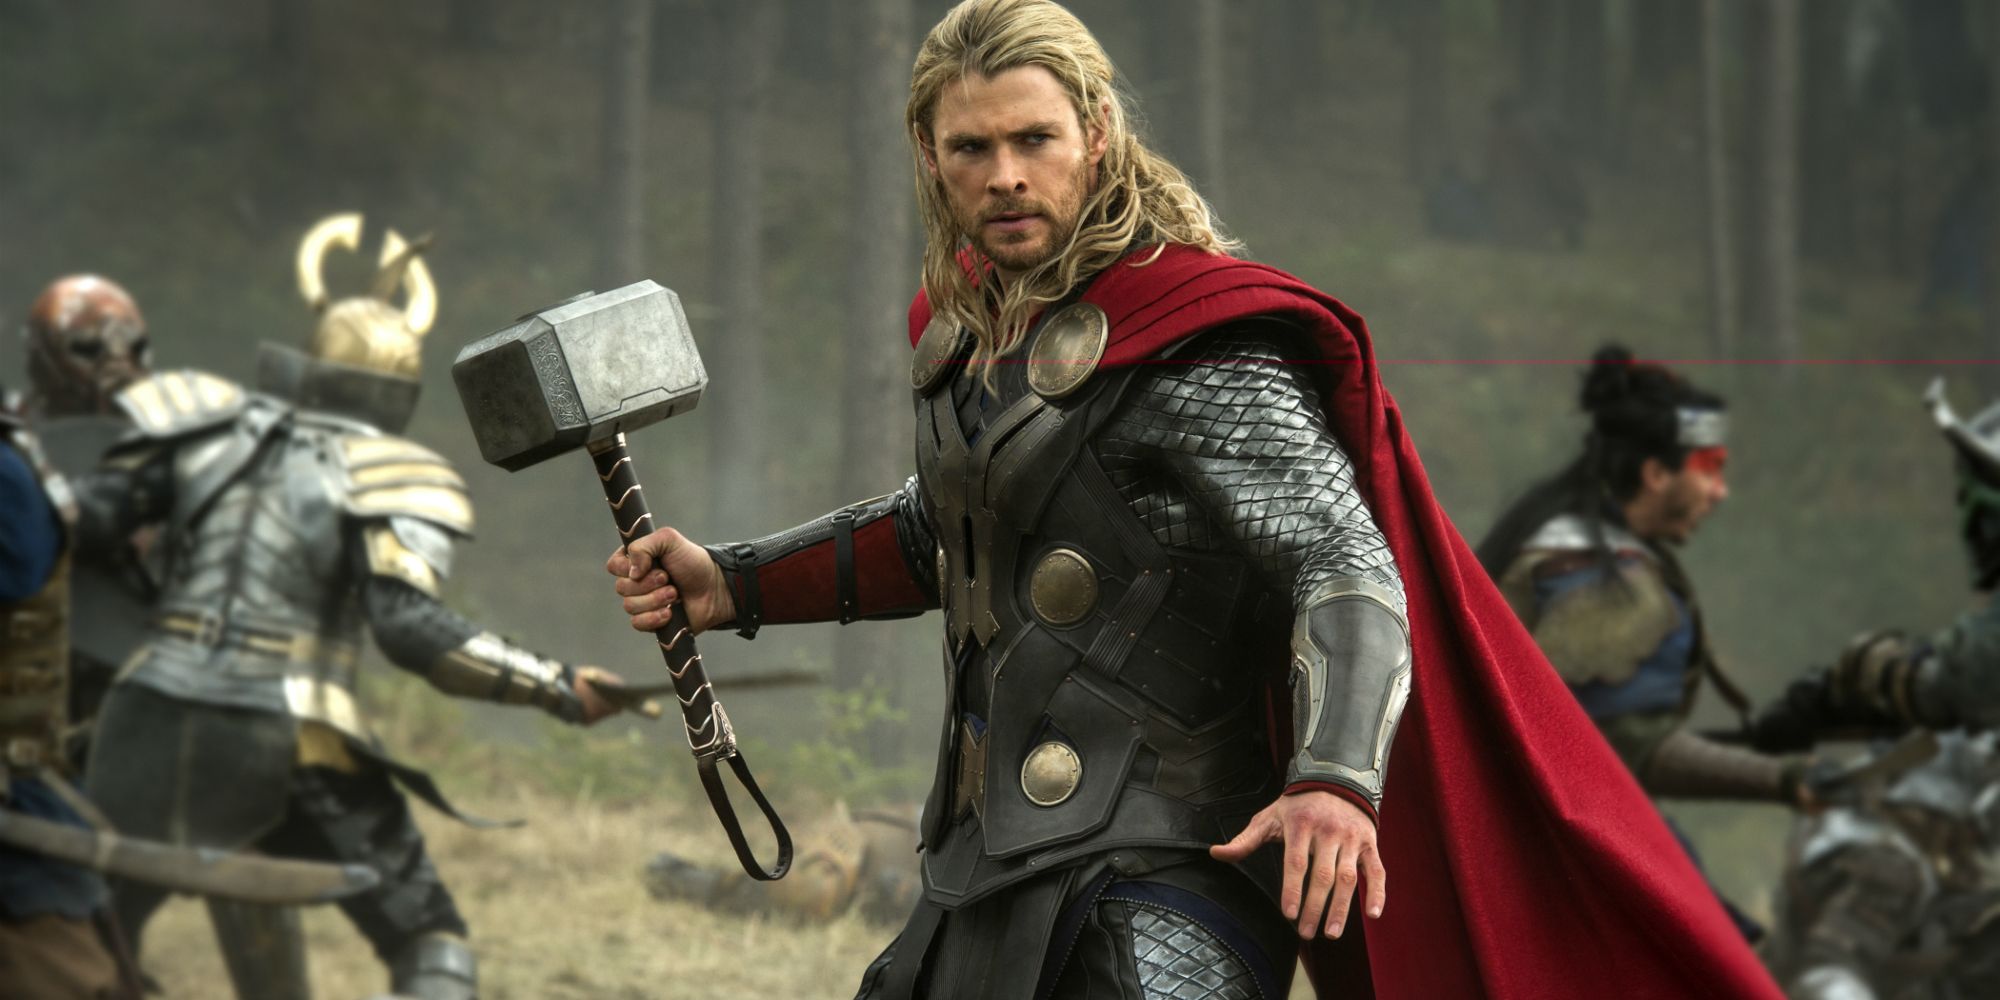 Thor with Mjolnir in combat